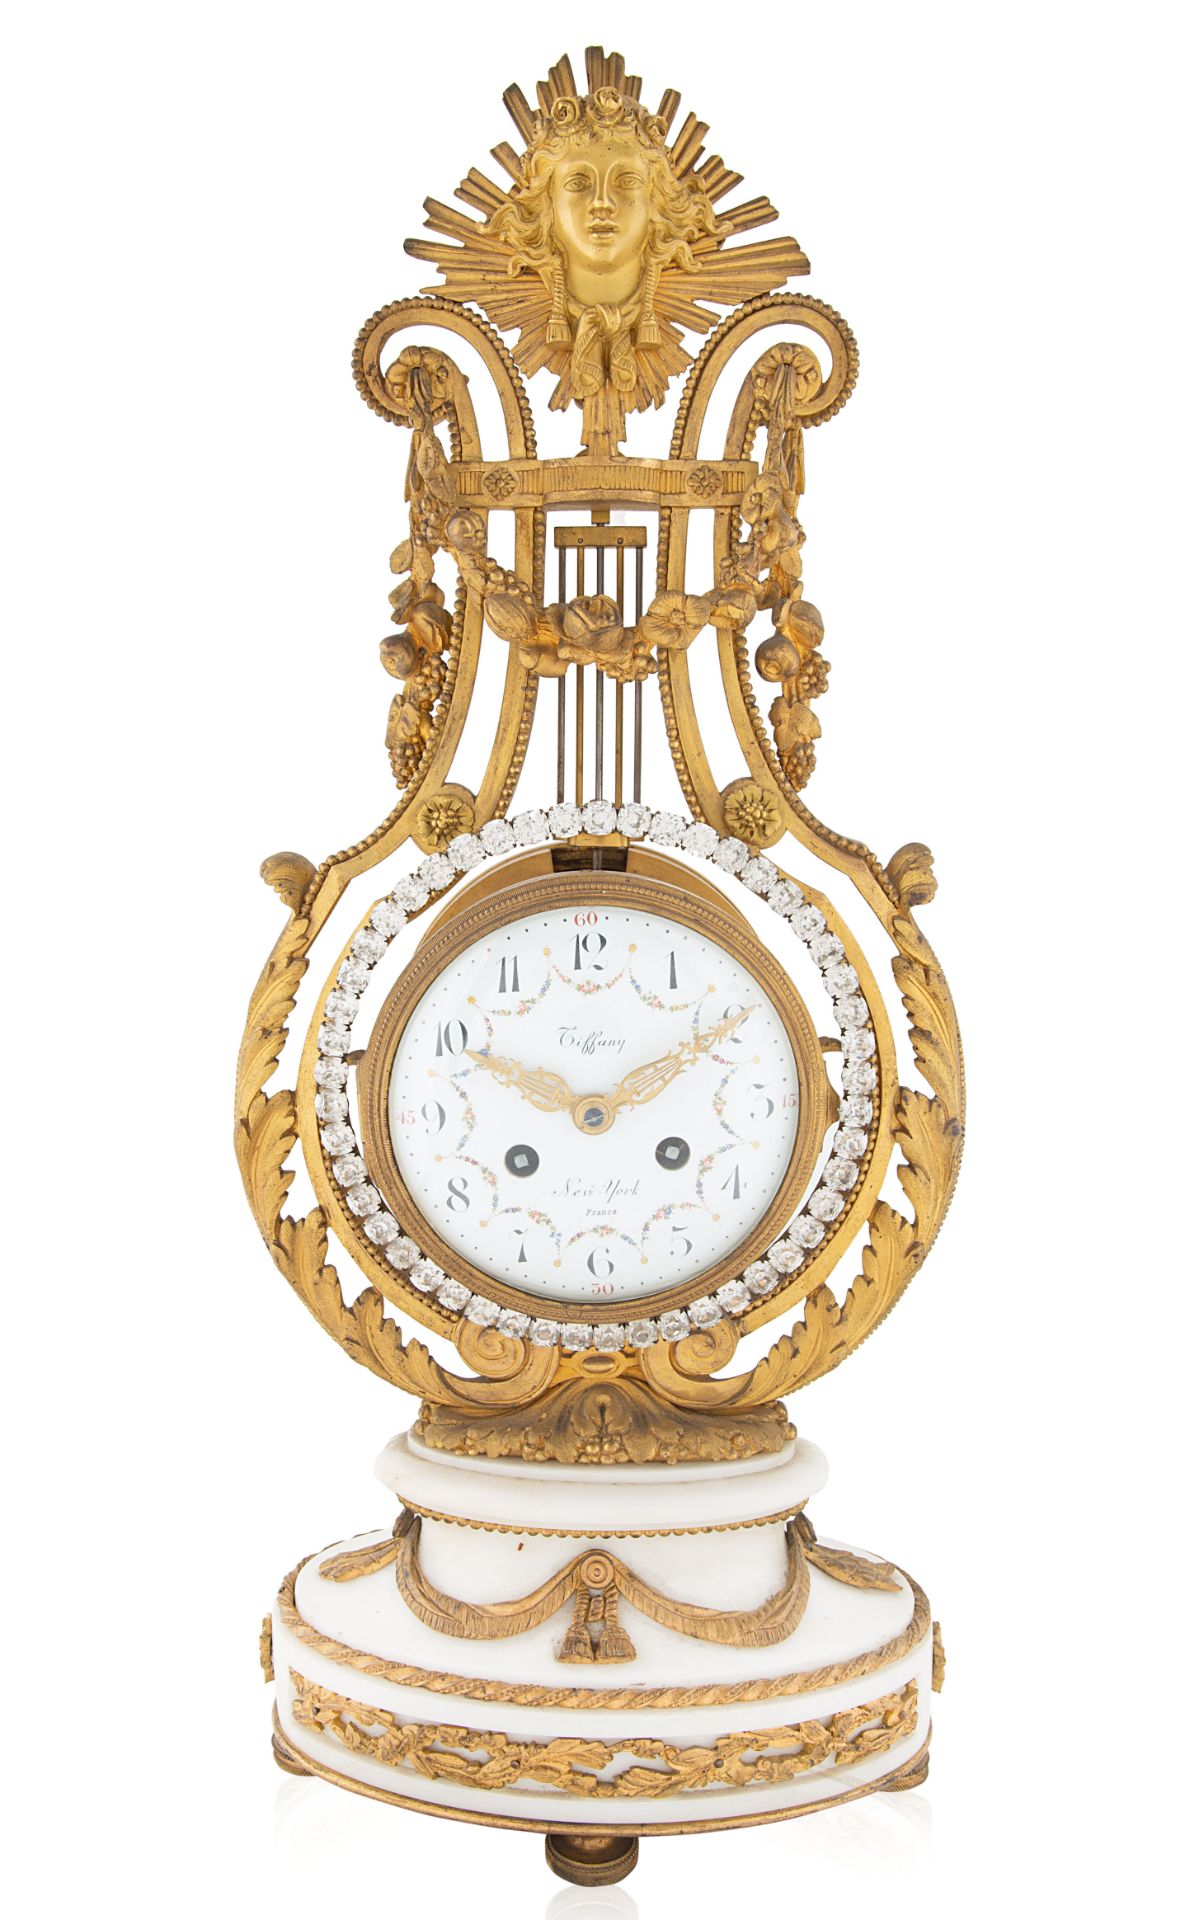 A LOUIS XVI STYLE BRONZE TIFFANY & CO. MANTLE CLOCK, LATE 19TH CENTURY